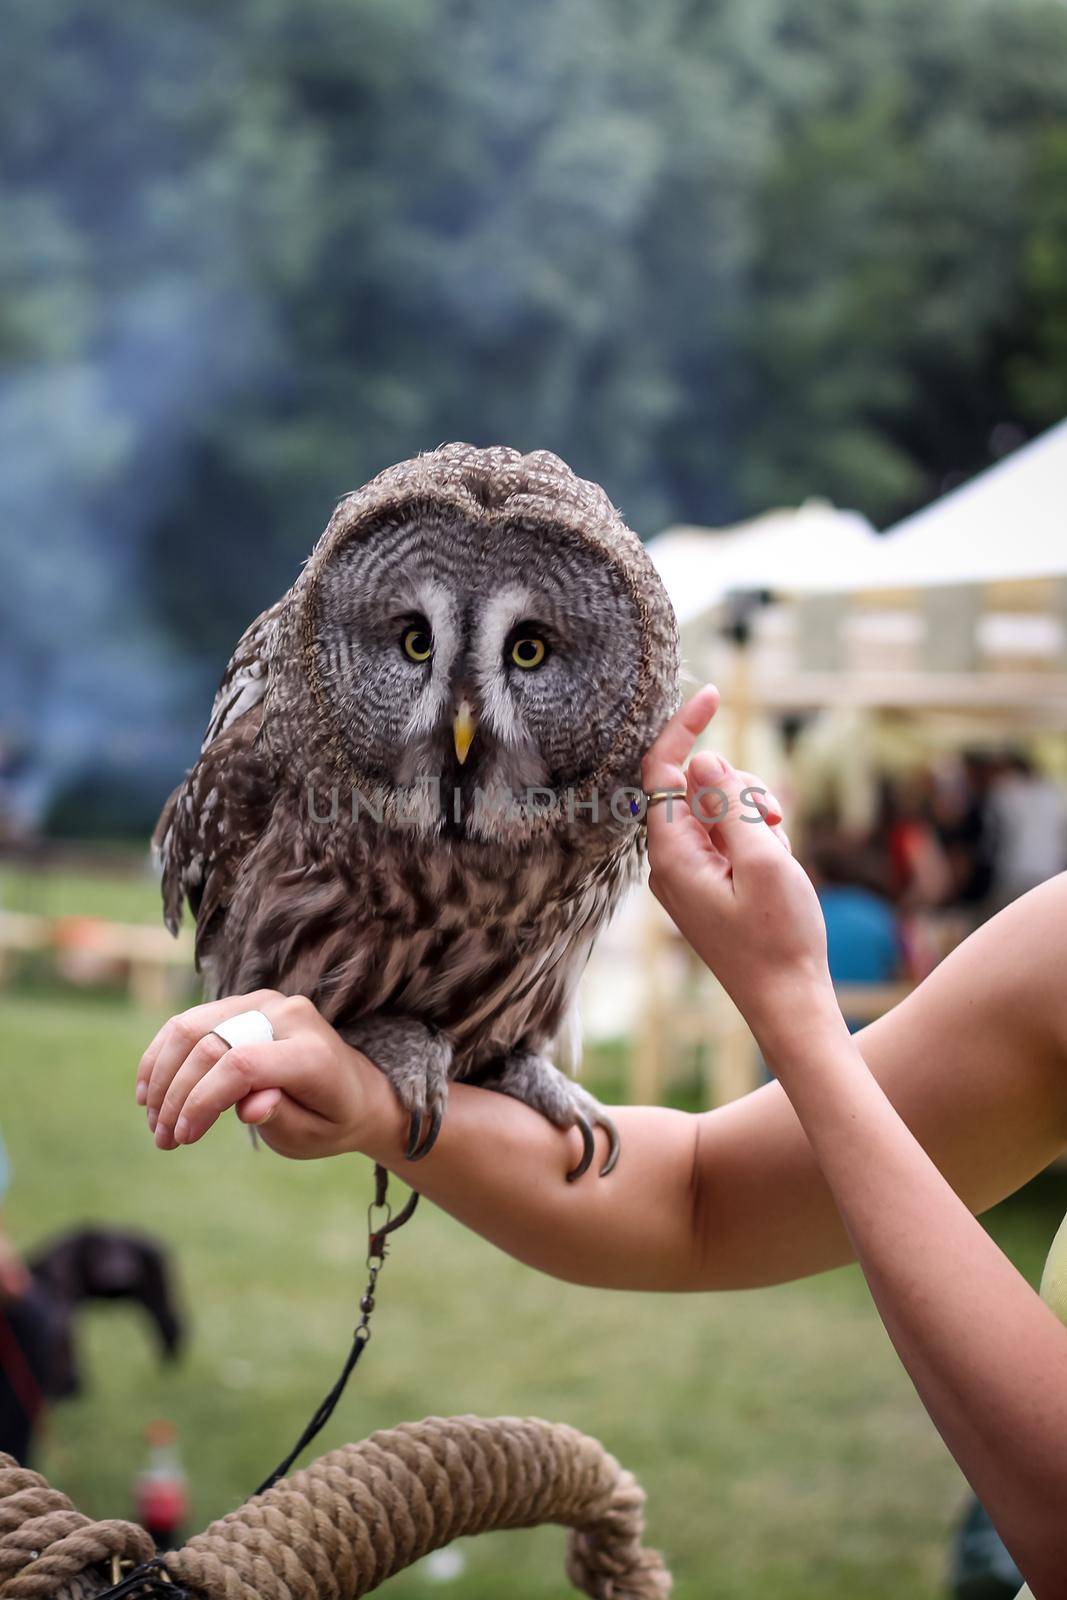 Women's hands hold an owl, an exotic animal. The nocturnal predator sits on the hand, caring, domestic, tamed.